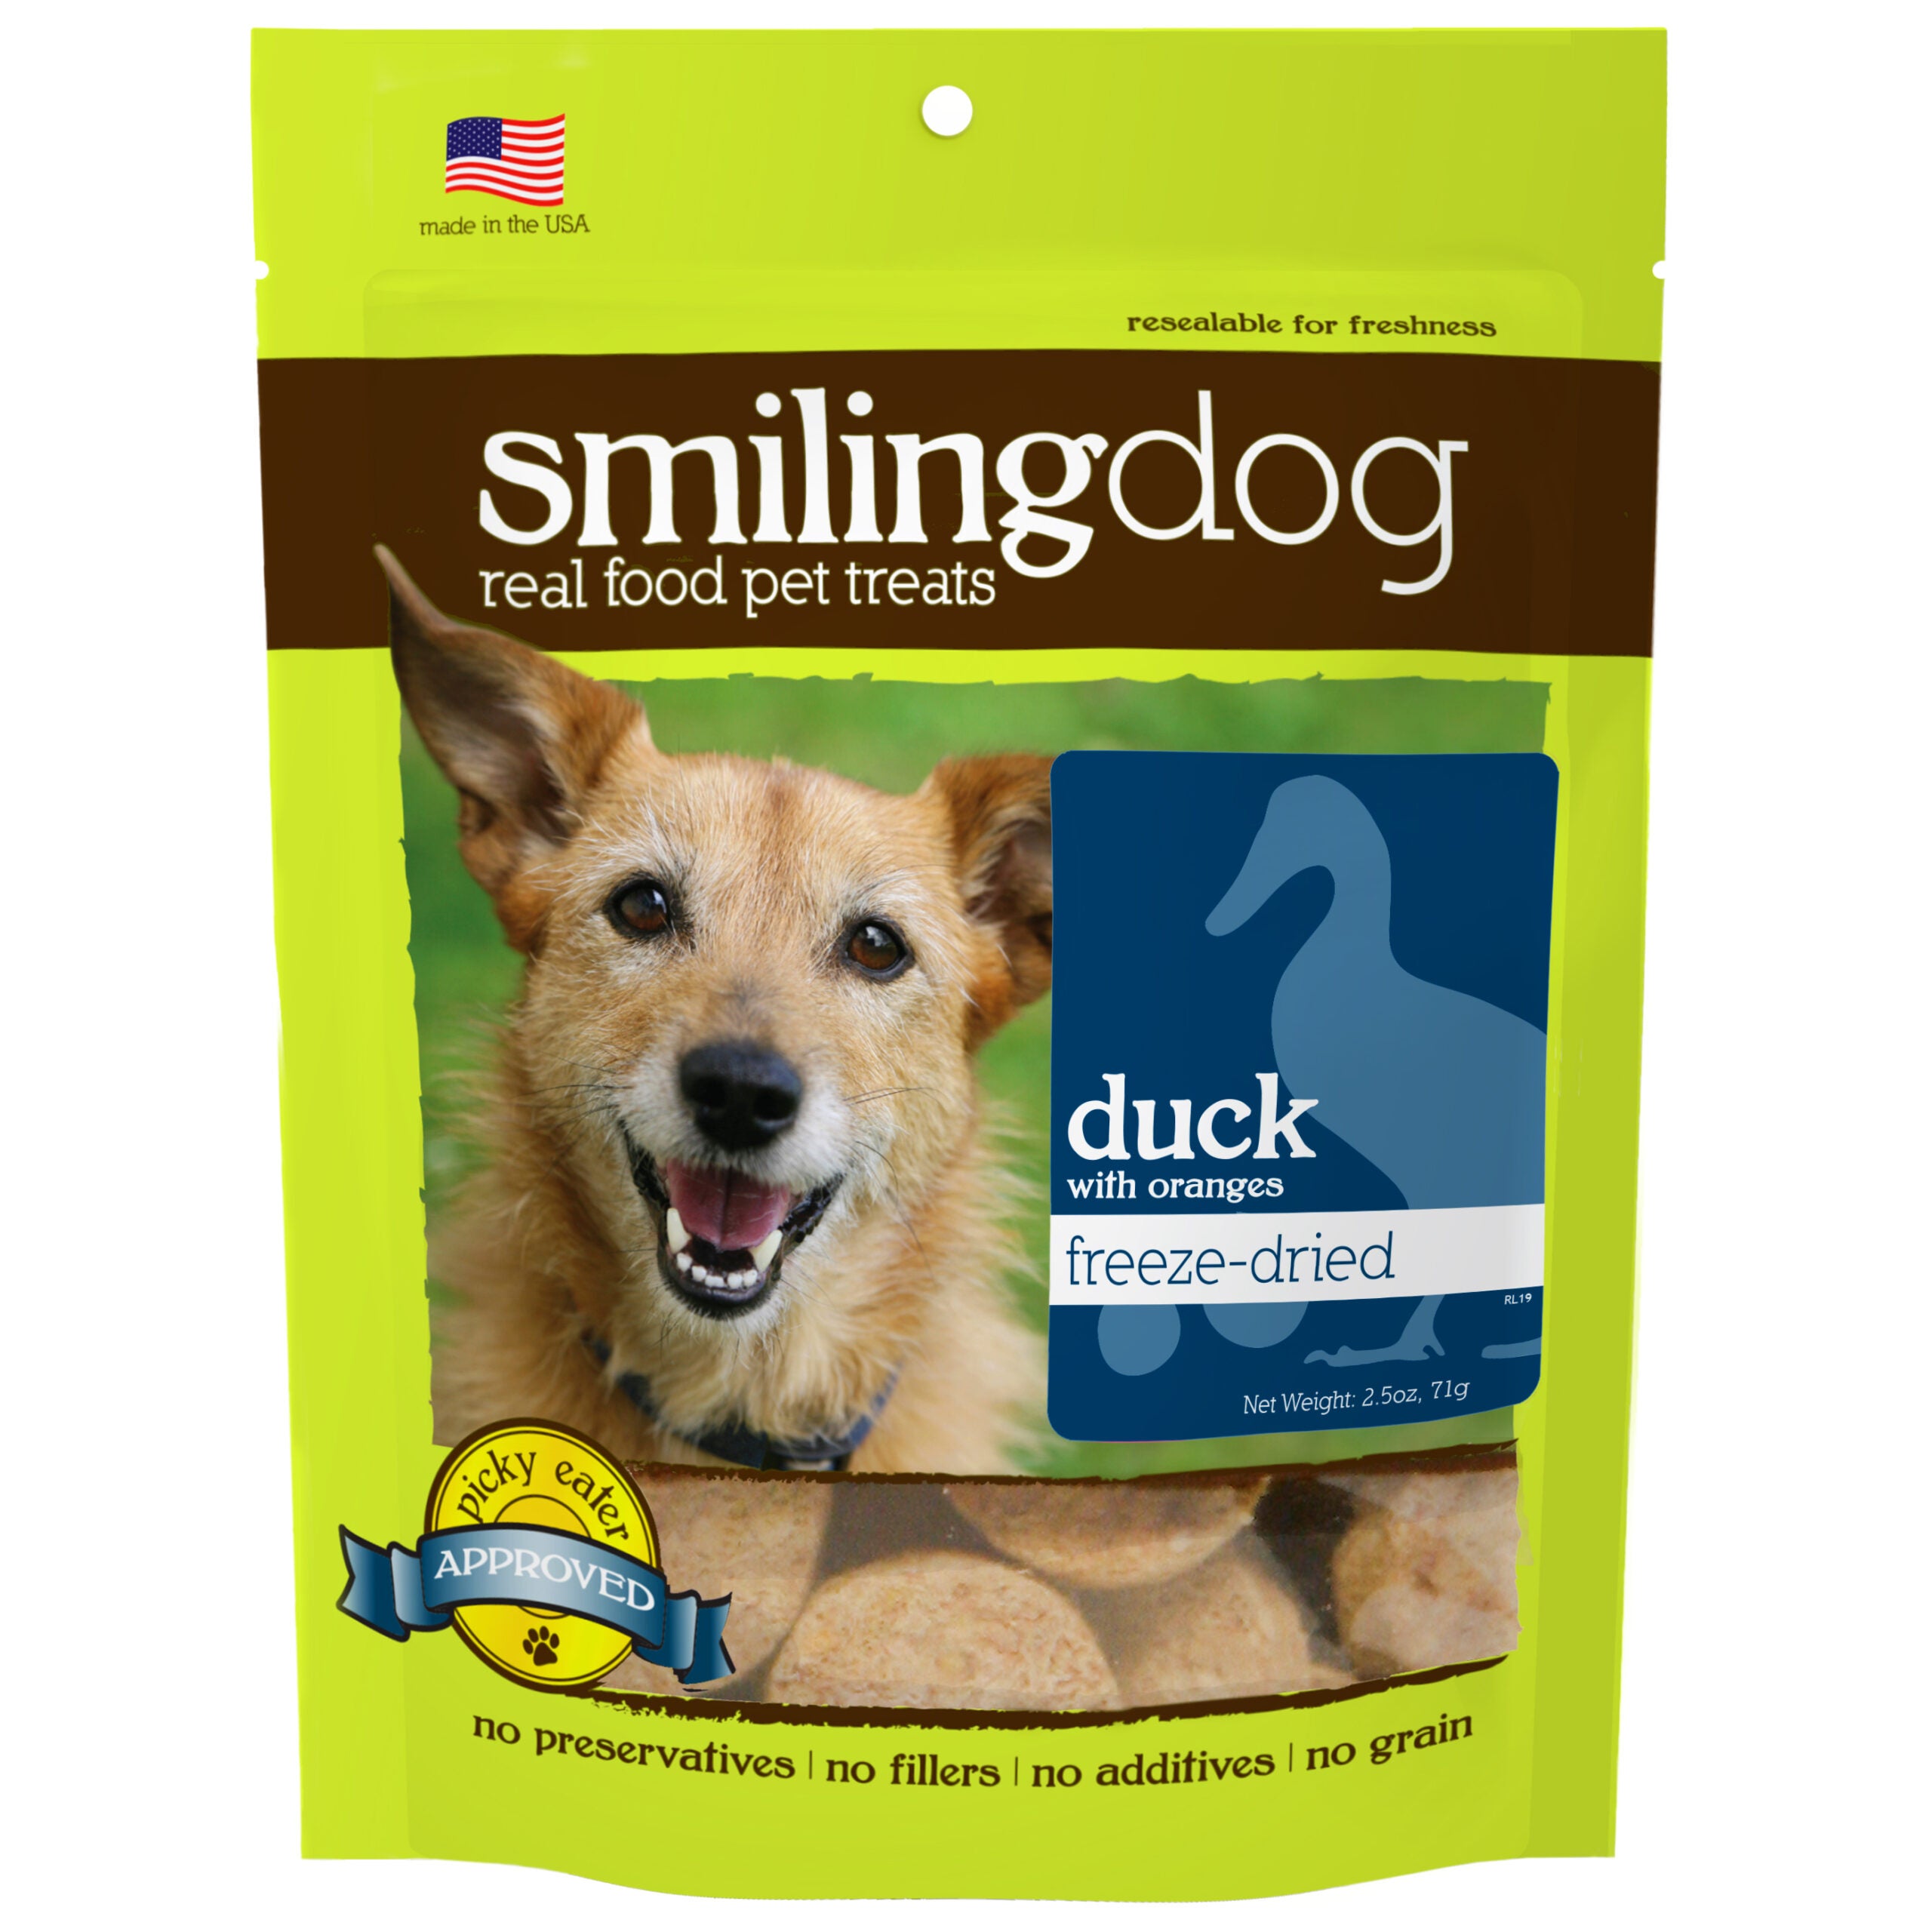 Herbsmith Smiling Dog Freeze-Dried Treats for Dogs (4 Pack)